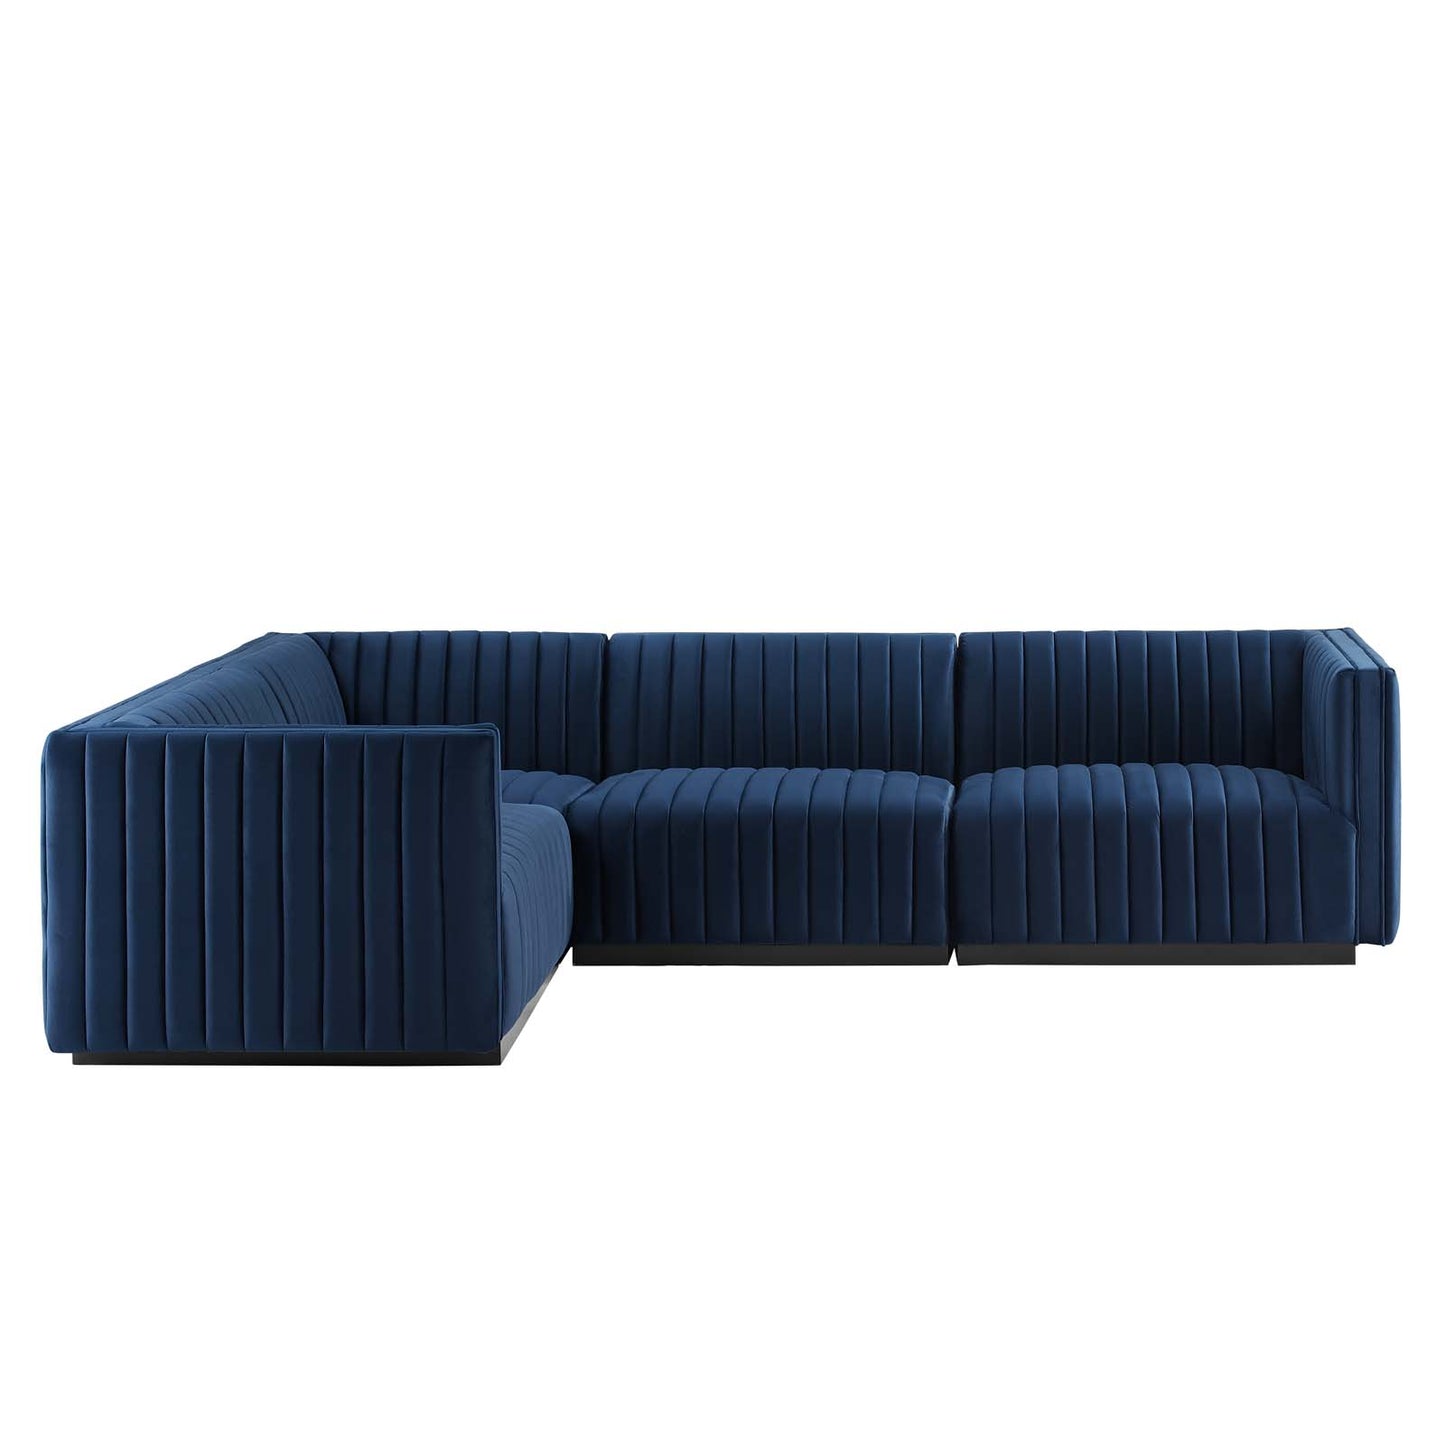 Conjure Channel Tufted Performance Velvet 4-Piece Sectional Black Midnight Blue EEI-5769-BLK-MID